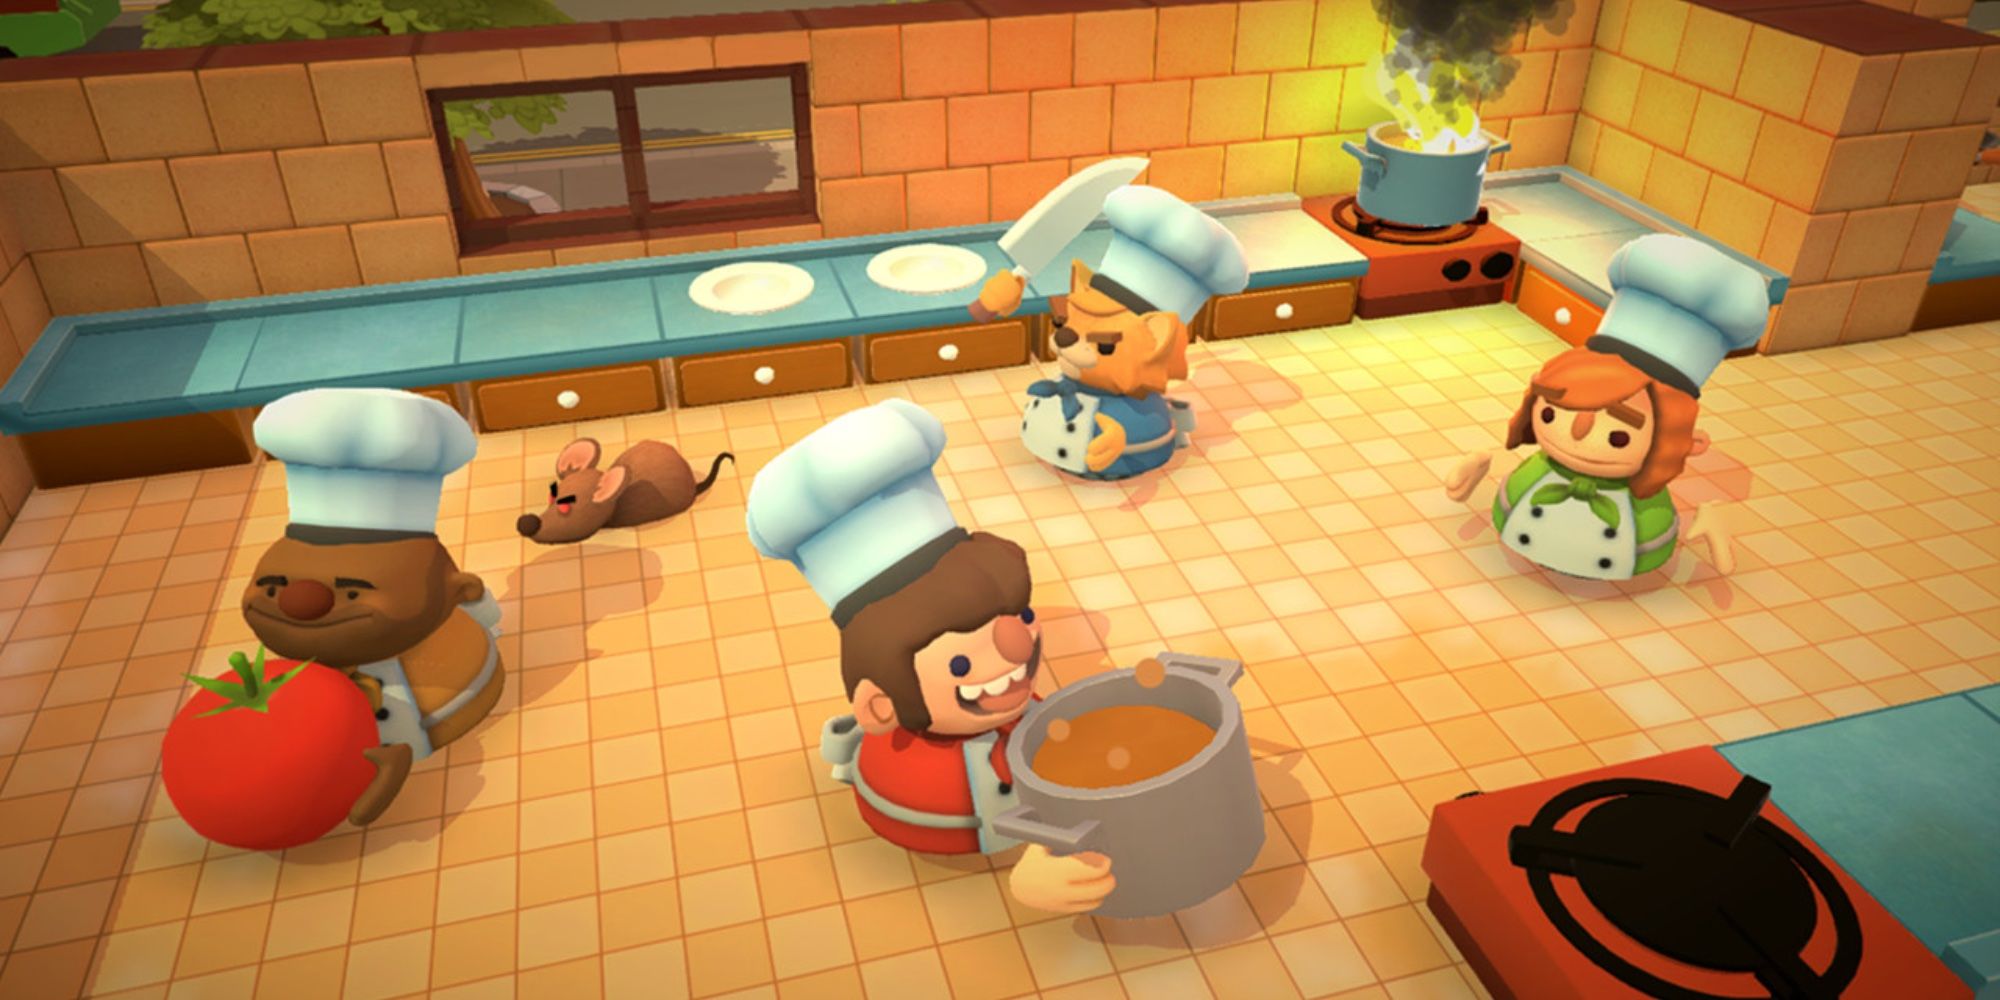 Overcooked: One player chasing a rat, another holding a tomato and another preparing soup